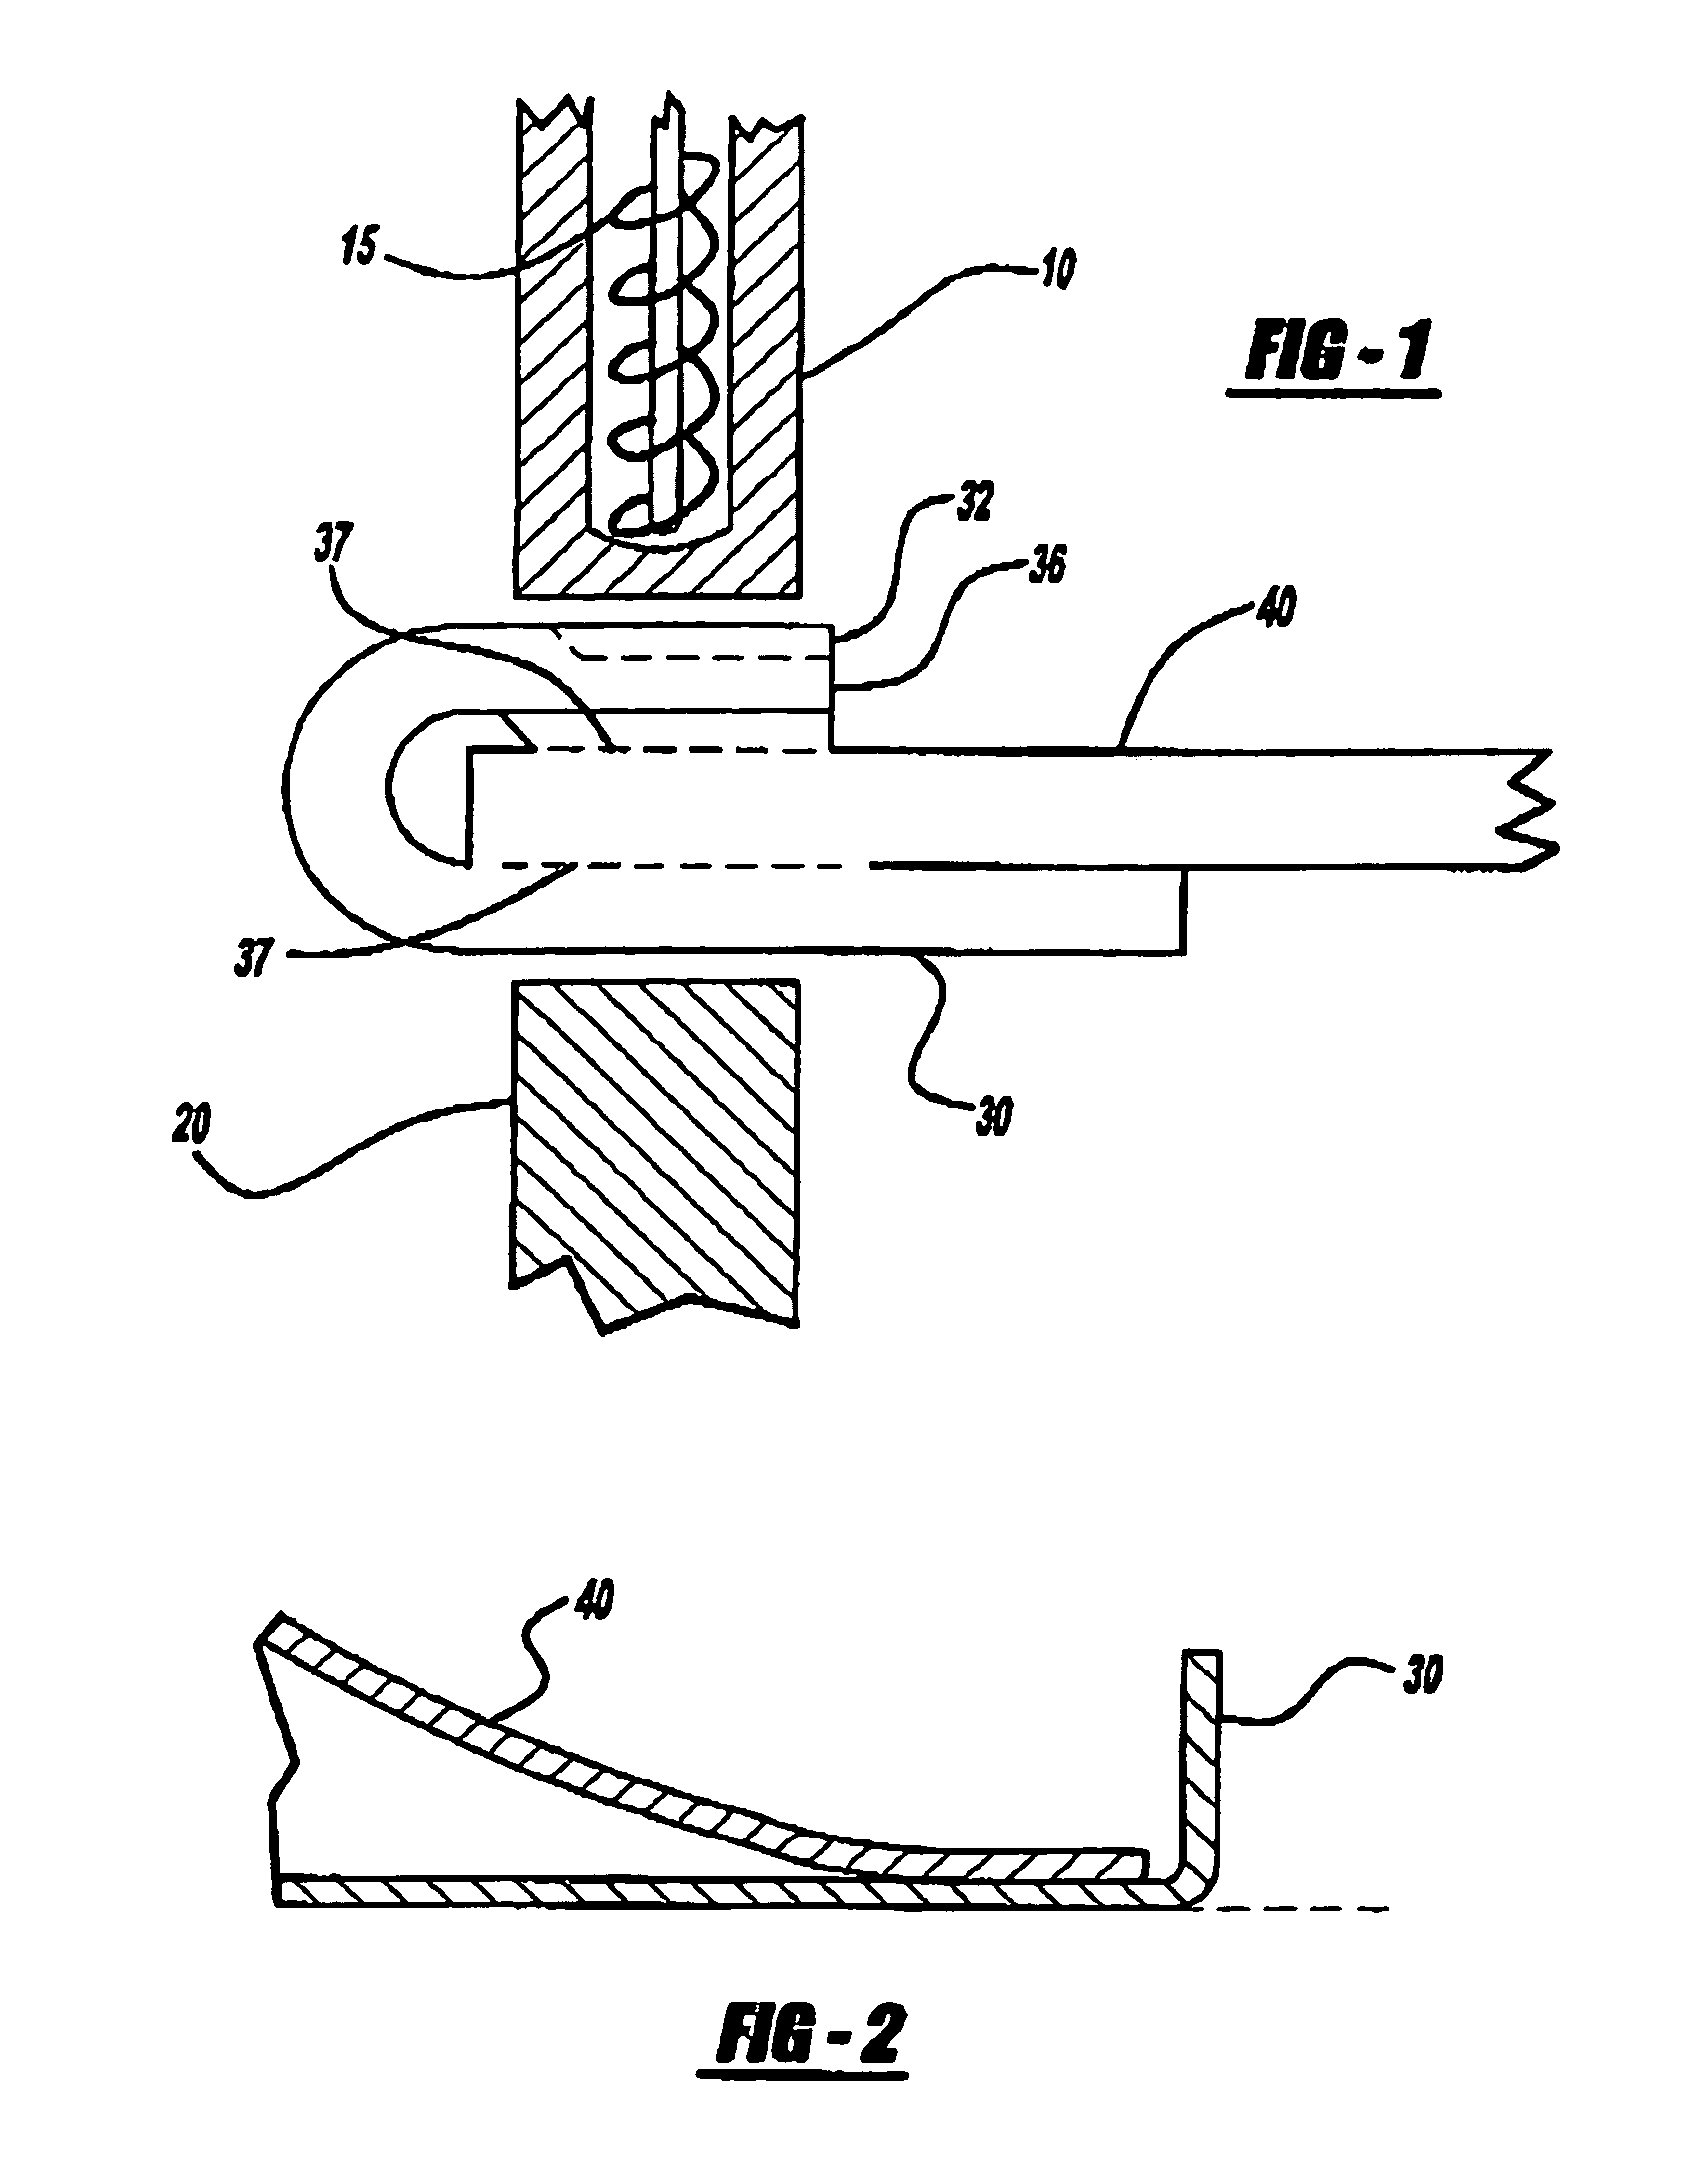 Electromagnetic hemming machine and method for joining sheet metal layers